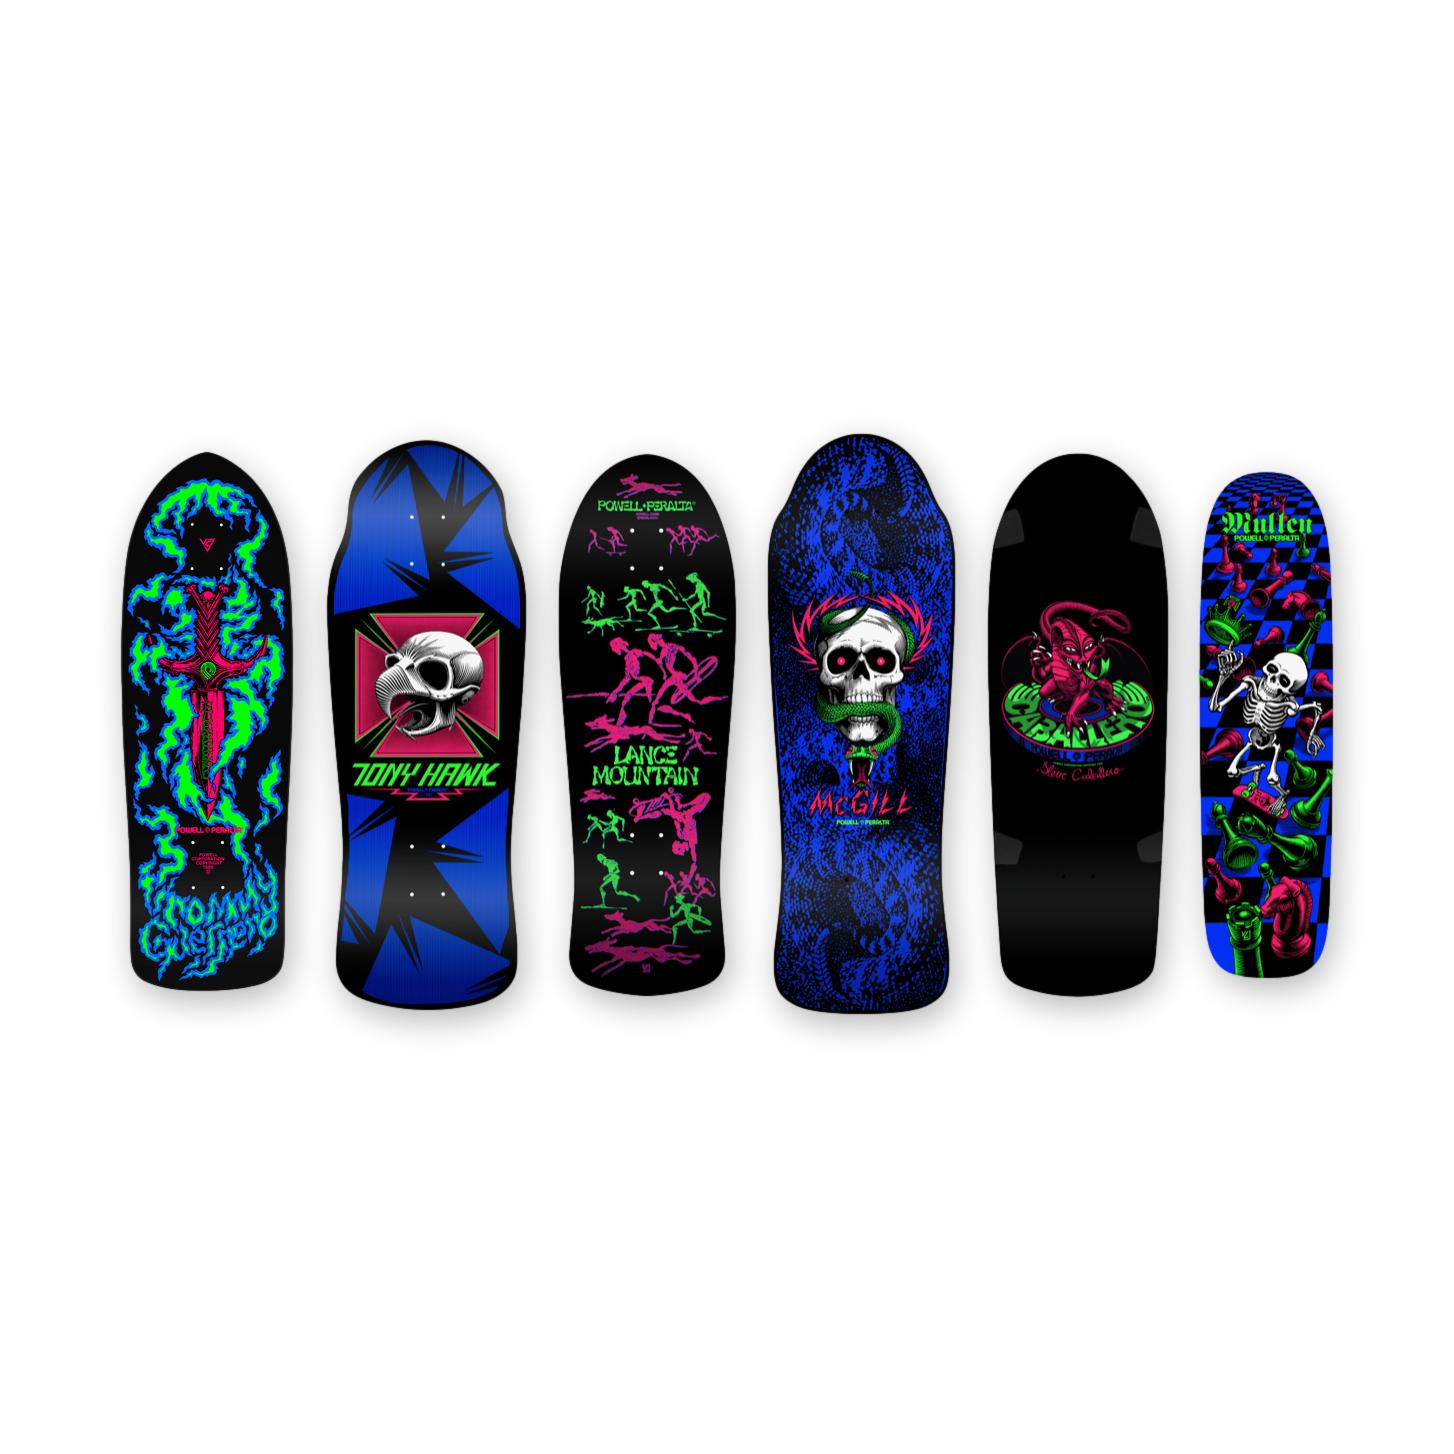 Powell-Peralta Re-Issue Limited Skateboard Decks, Series 14, Lance Mountain